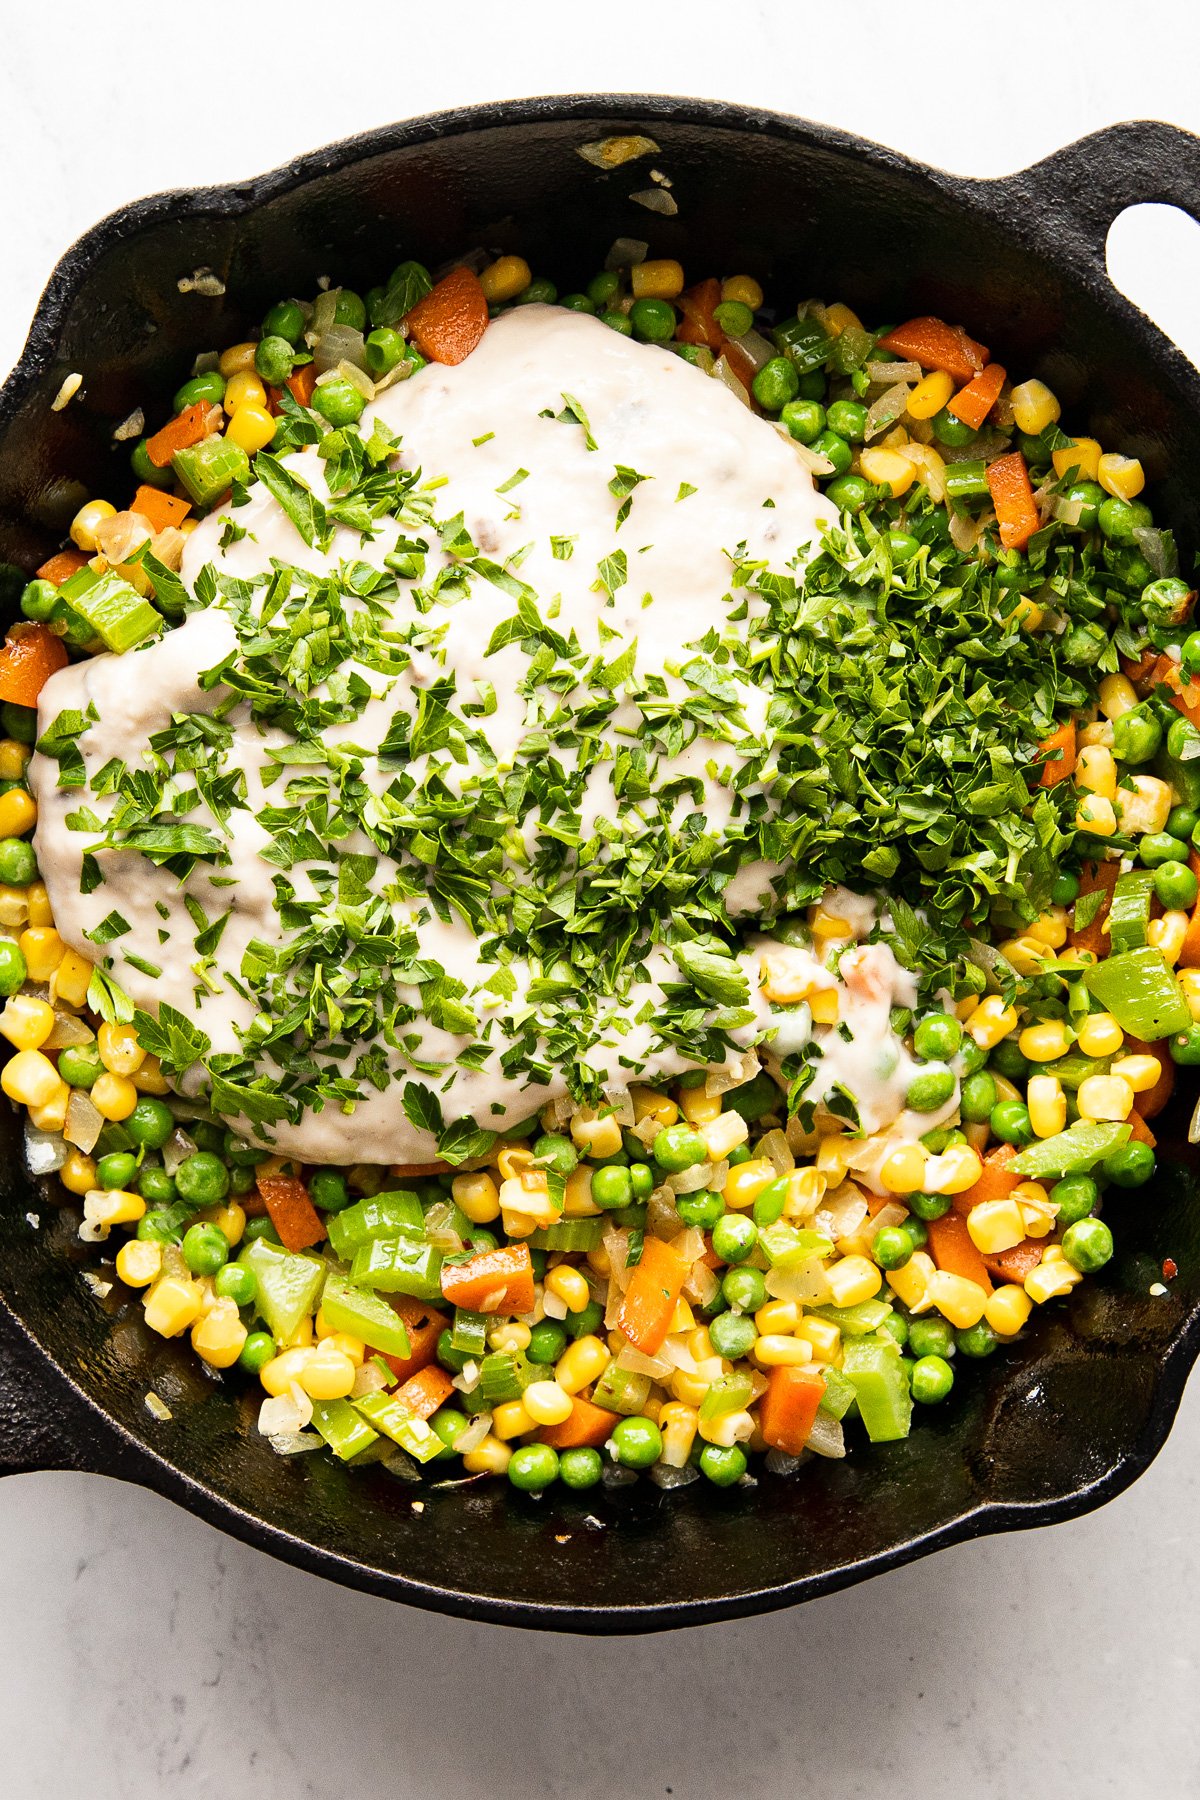 Skillet with vegetables topped with cream of mushroom soup and chopped parsley.